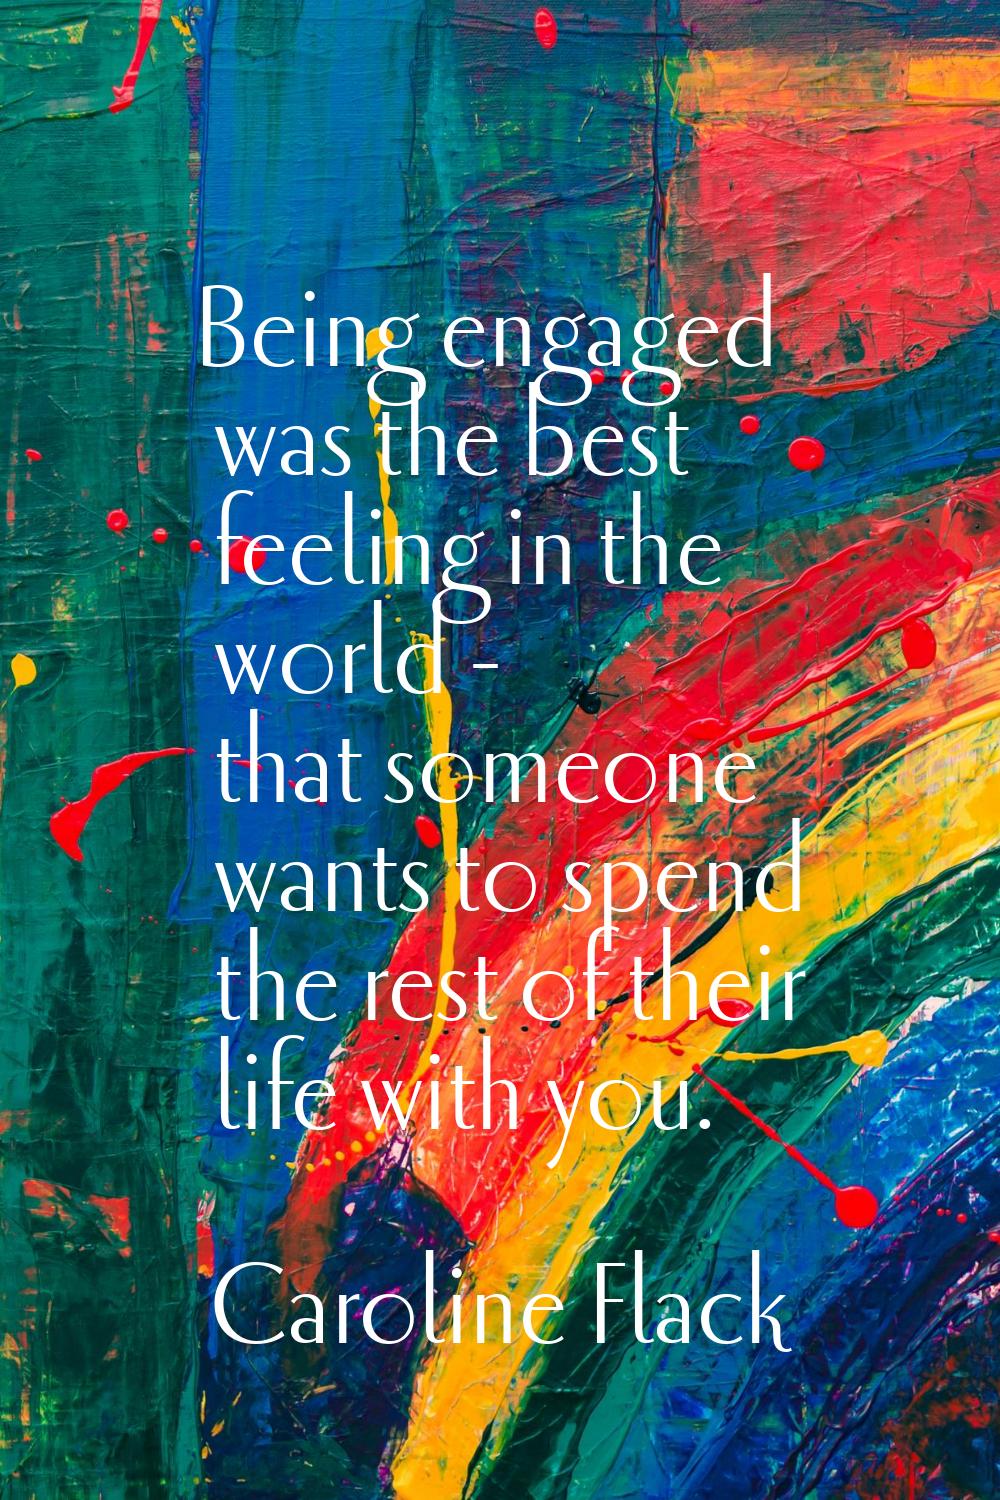 Being engaged was the best feeling in the world - that someone wants to spend the rest of their lif